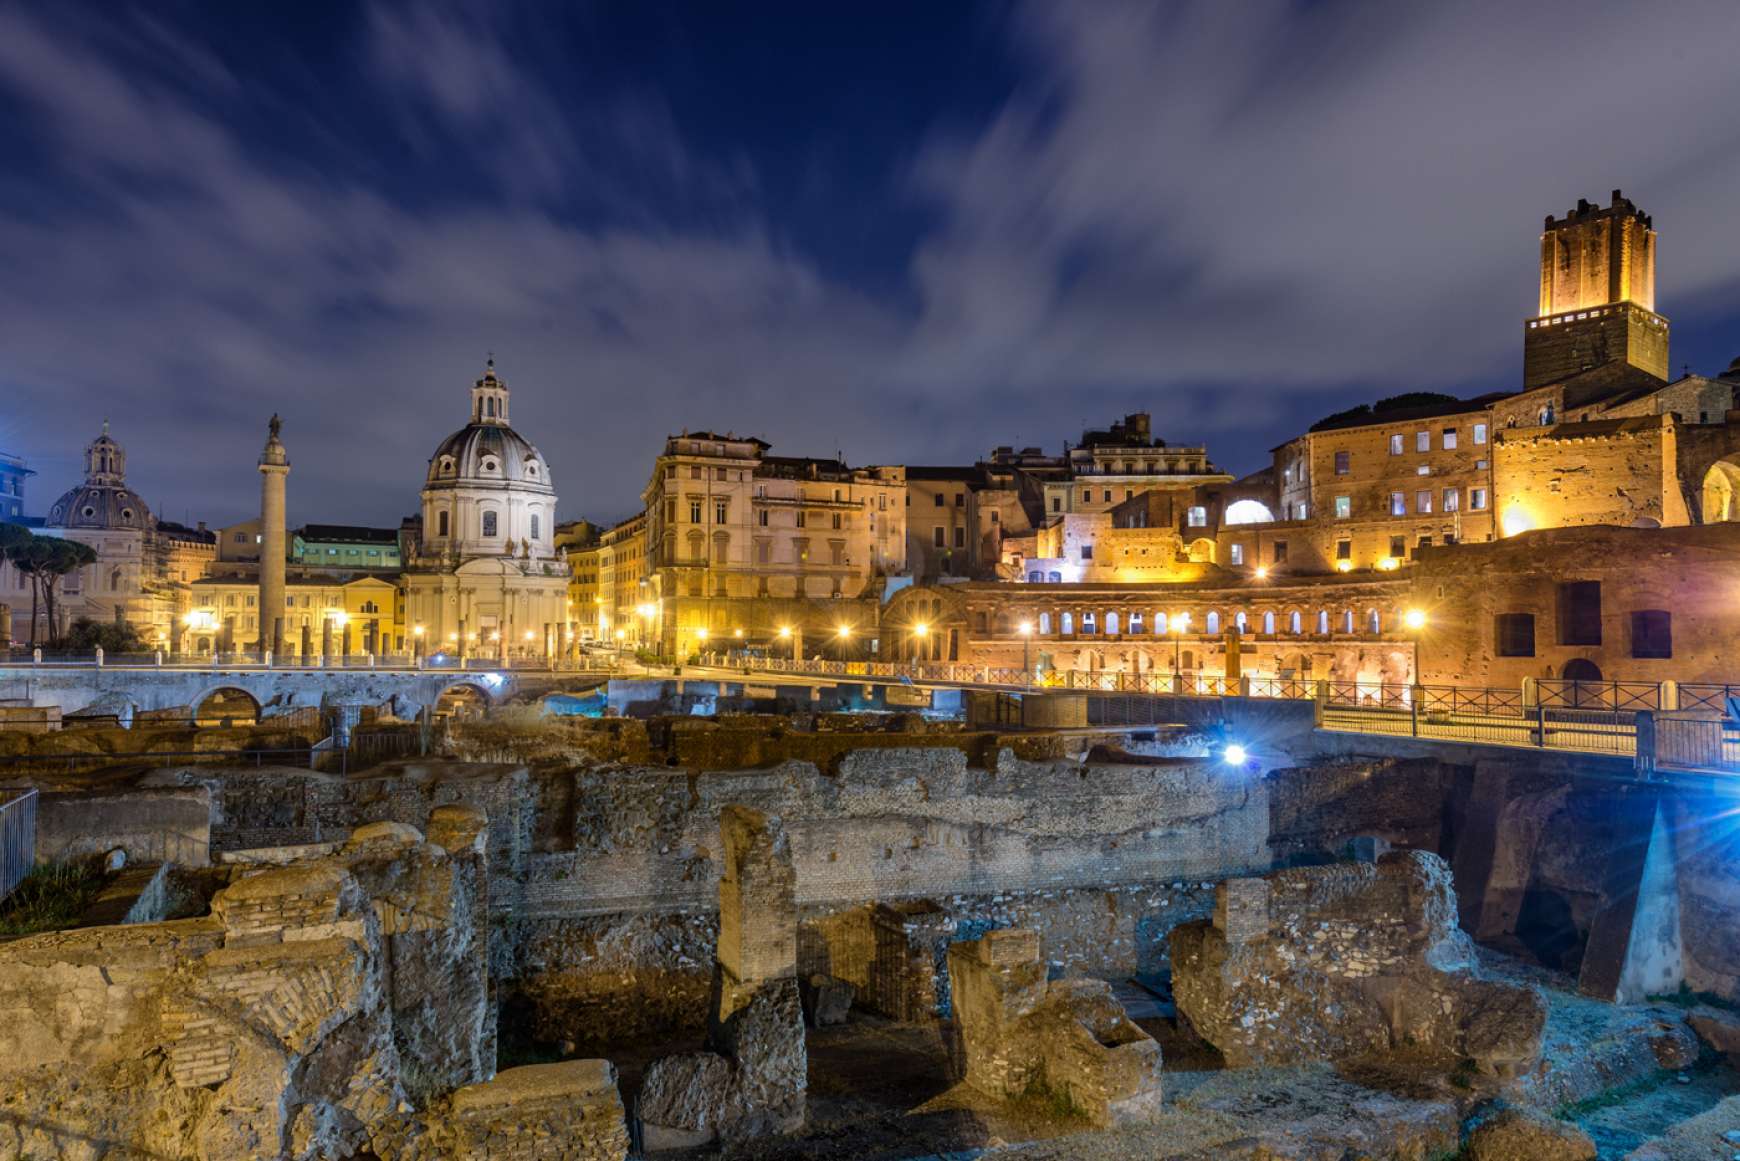 Evening view of the Roman Forum